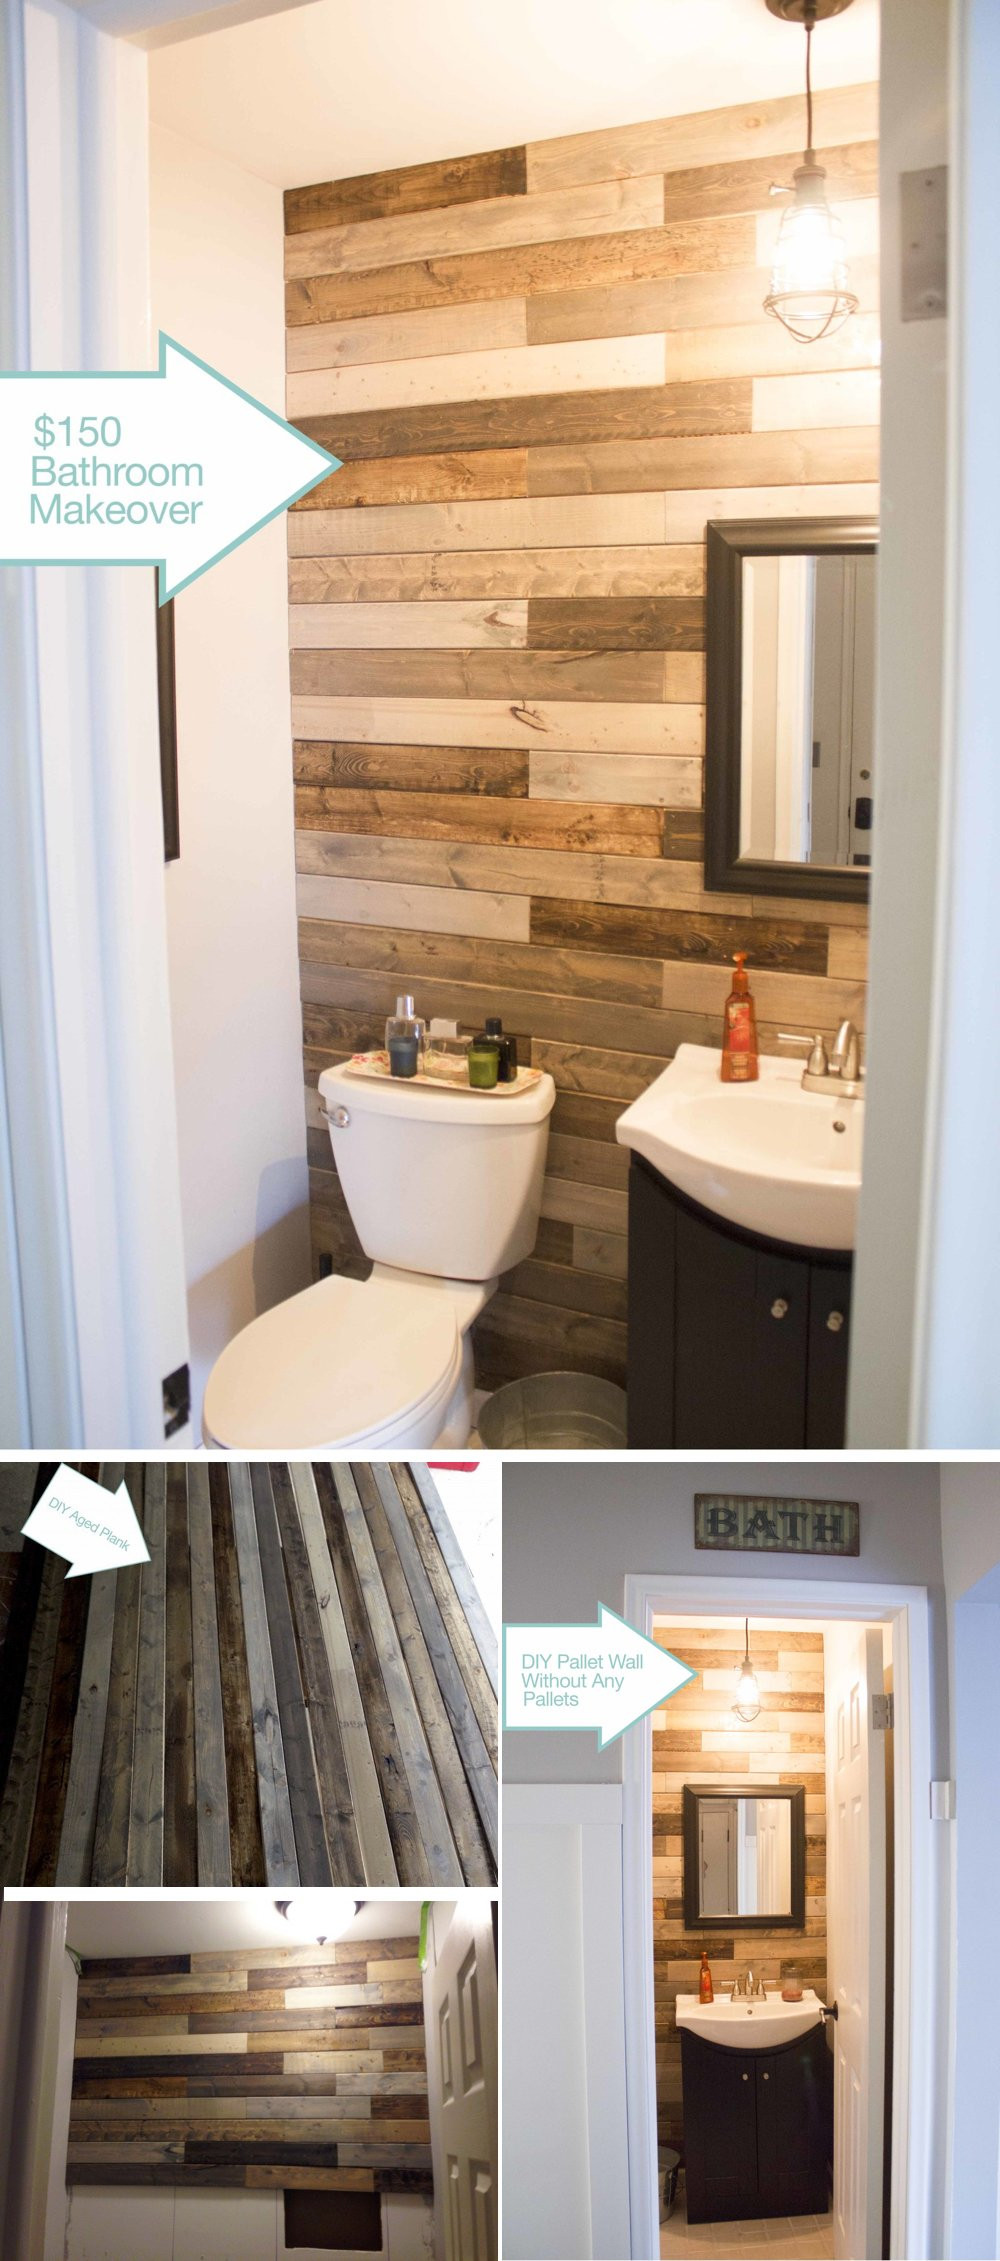 Bathroom Divider Walls
 15 Beautiful Wood Accent Wall Ideas to Upgrade Your Space